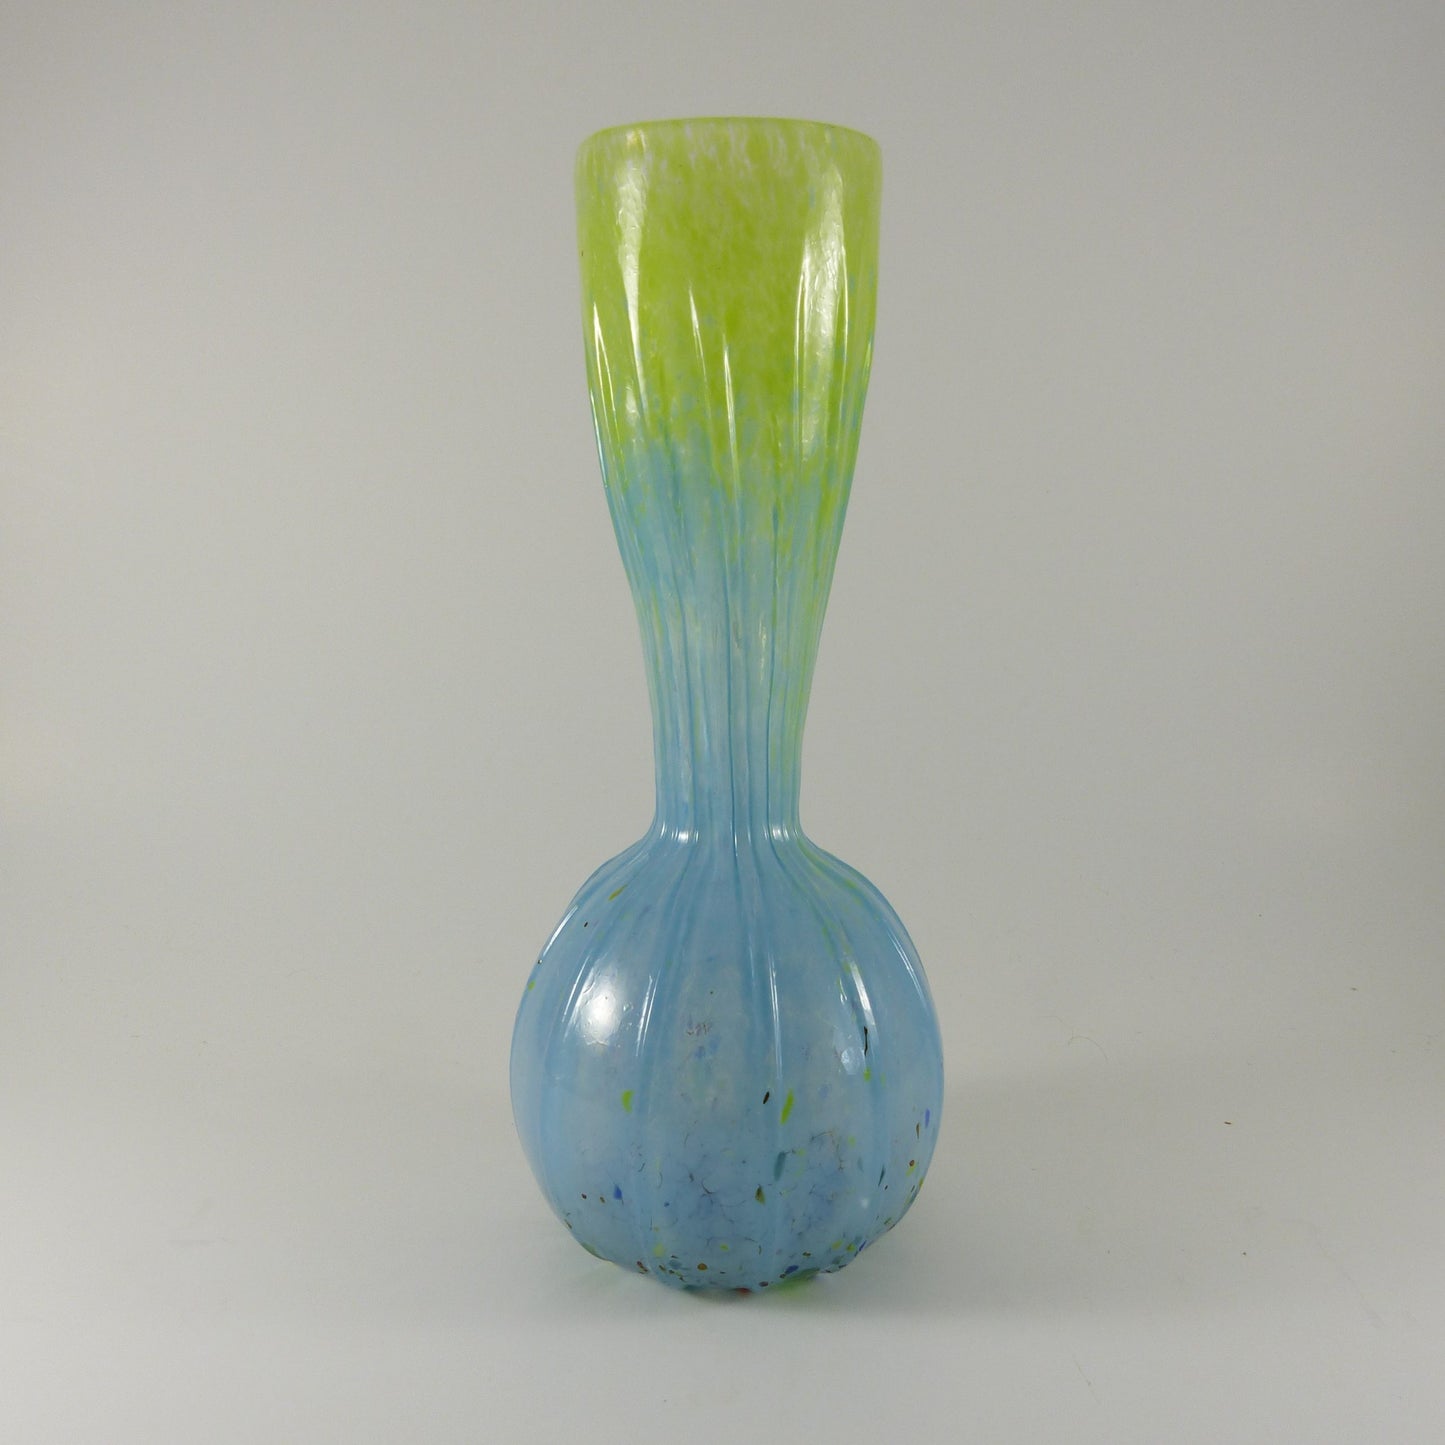 Tall blue and yellow glass vase